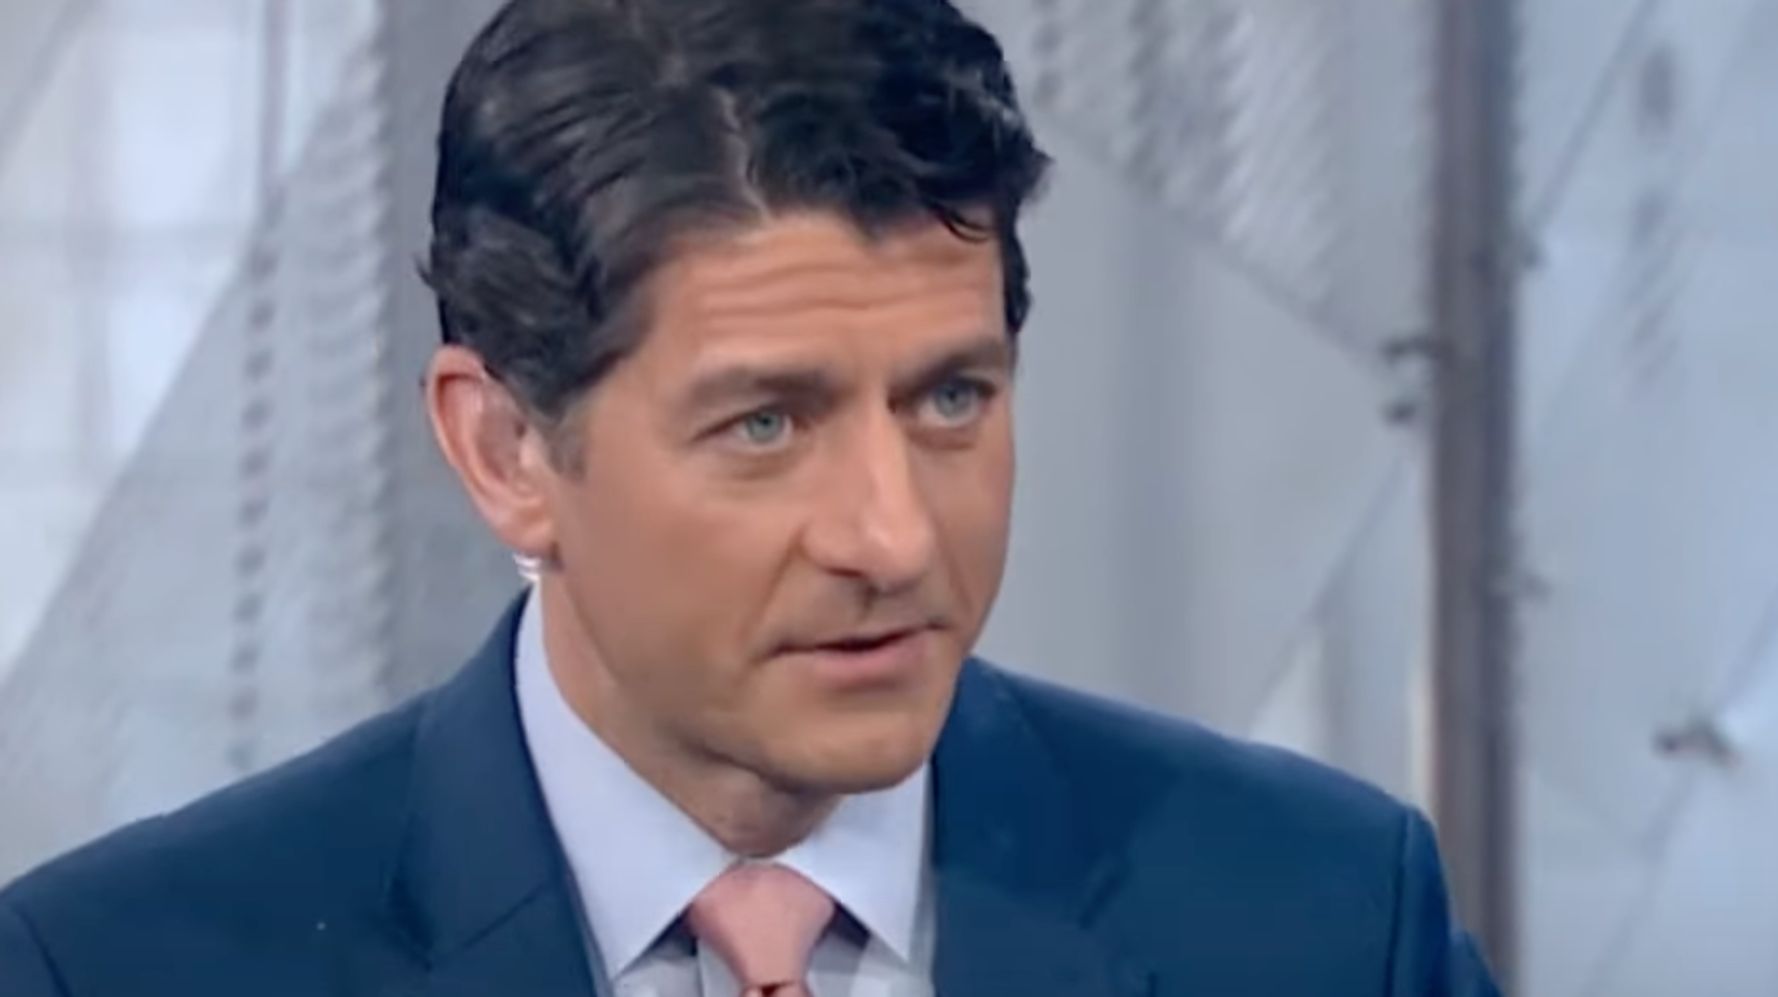 Paul Ryan: A 'Lot' Of Republicans Wanted To Impeach Trump But 'Didn't Have The Guts'